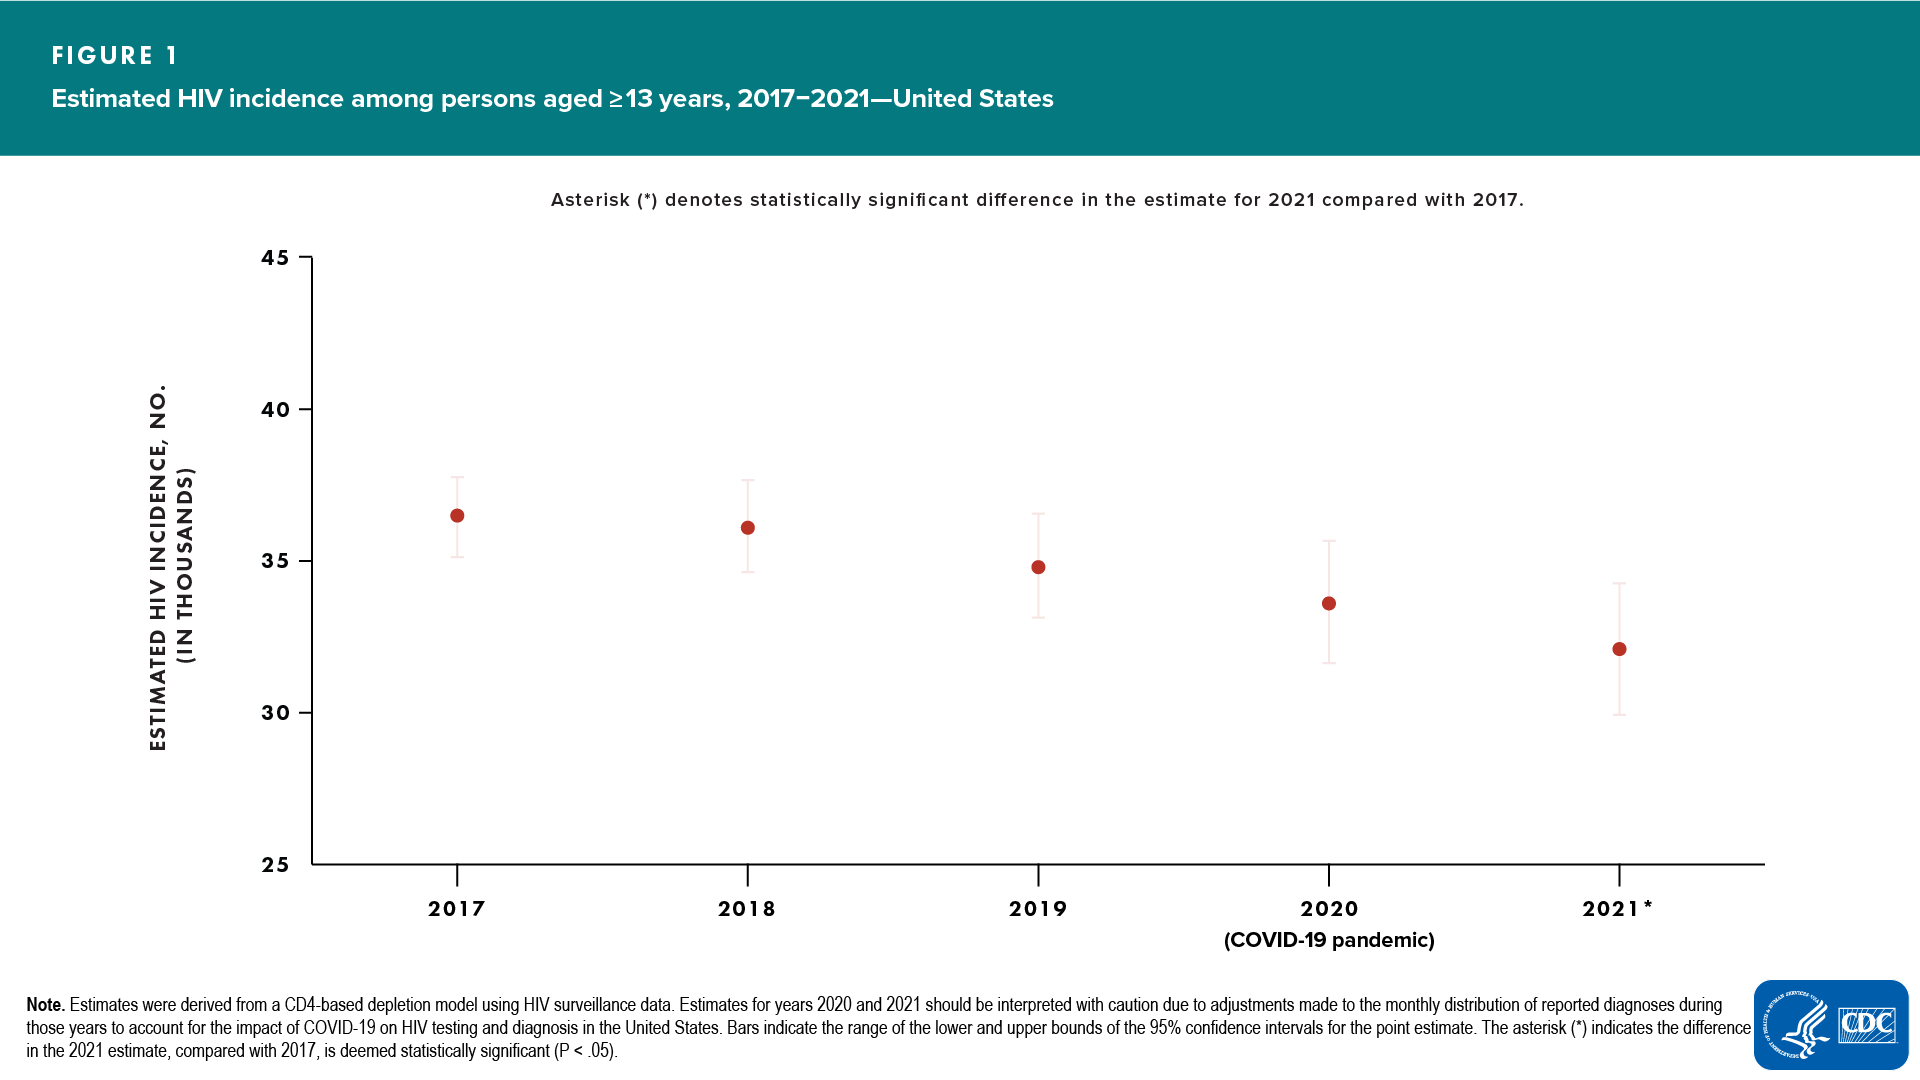 Figure 1. Estimated HIV incidence among persons aged ≥13 years, 2017–2021—United States